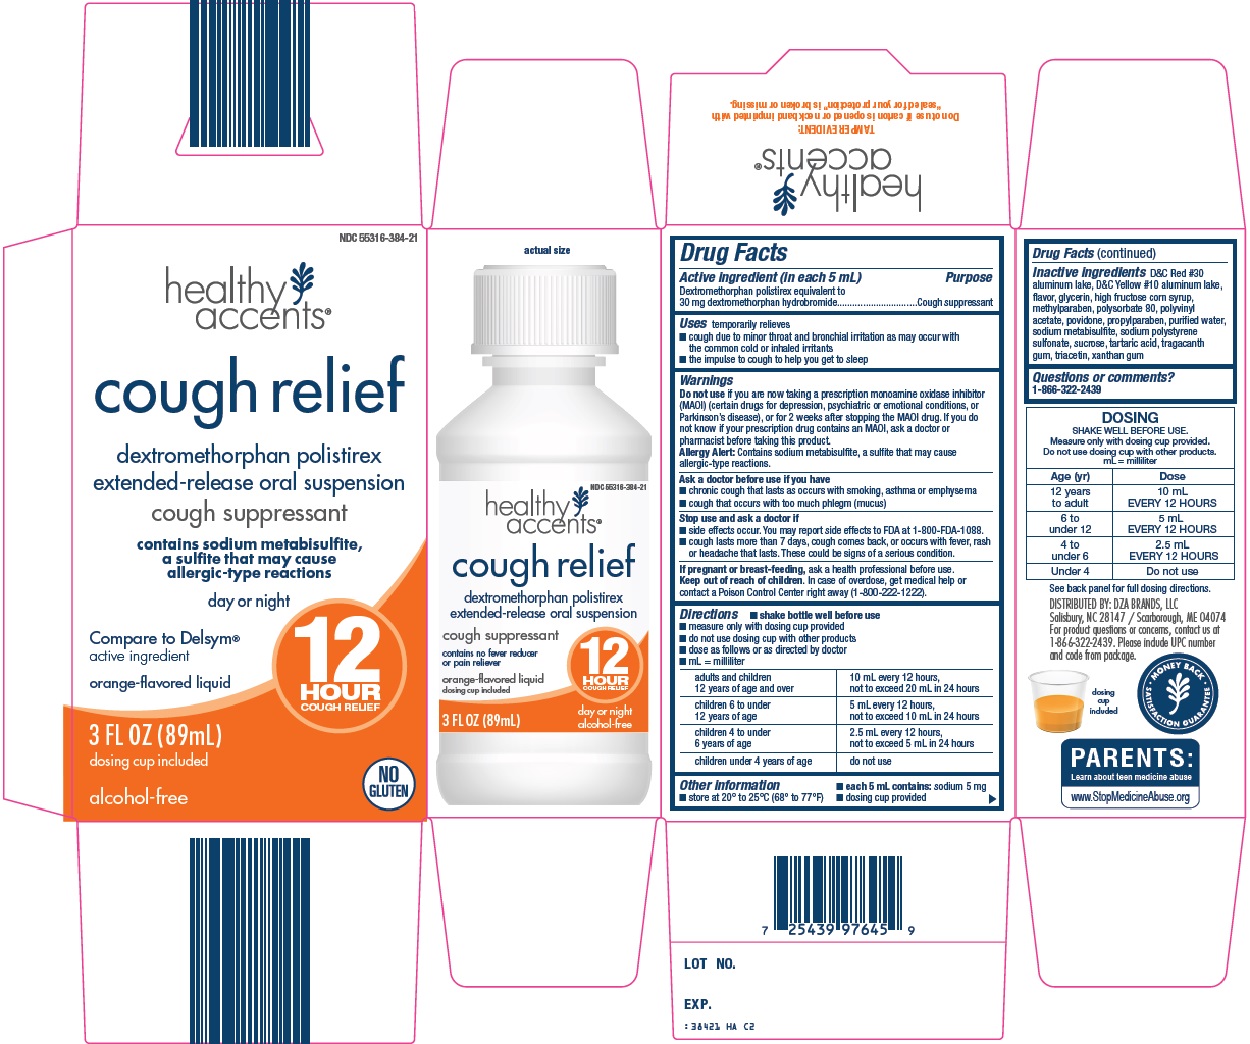 Healthy Accents Cough Relief image